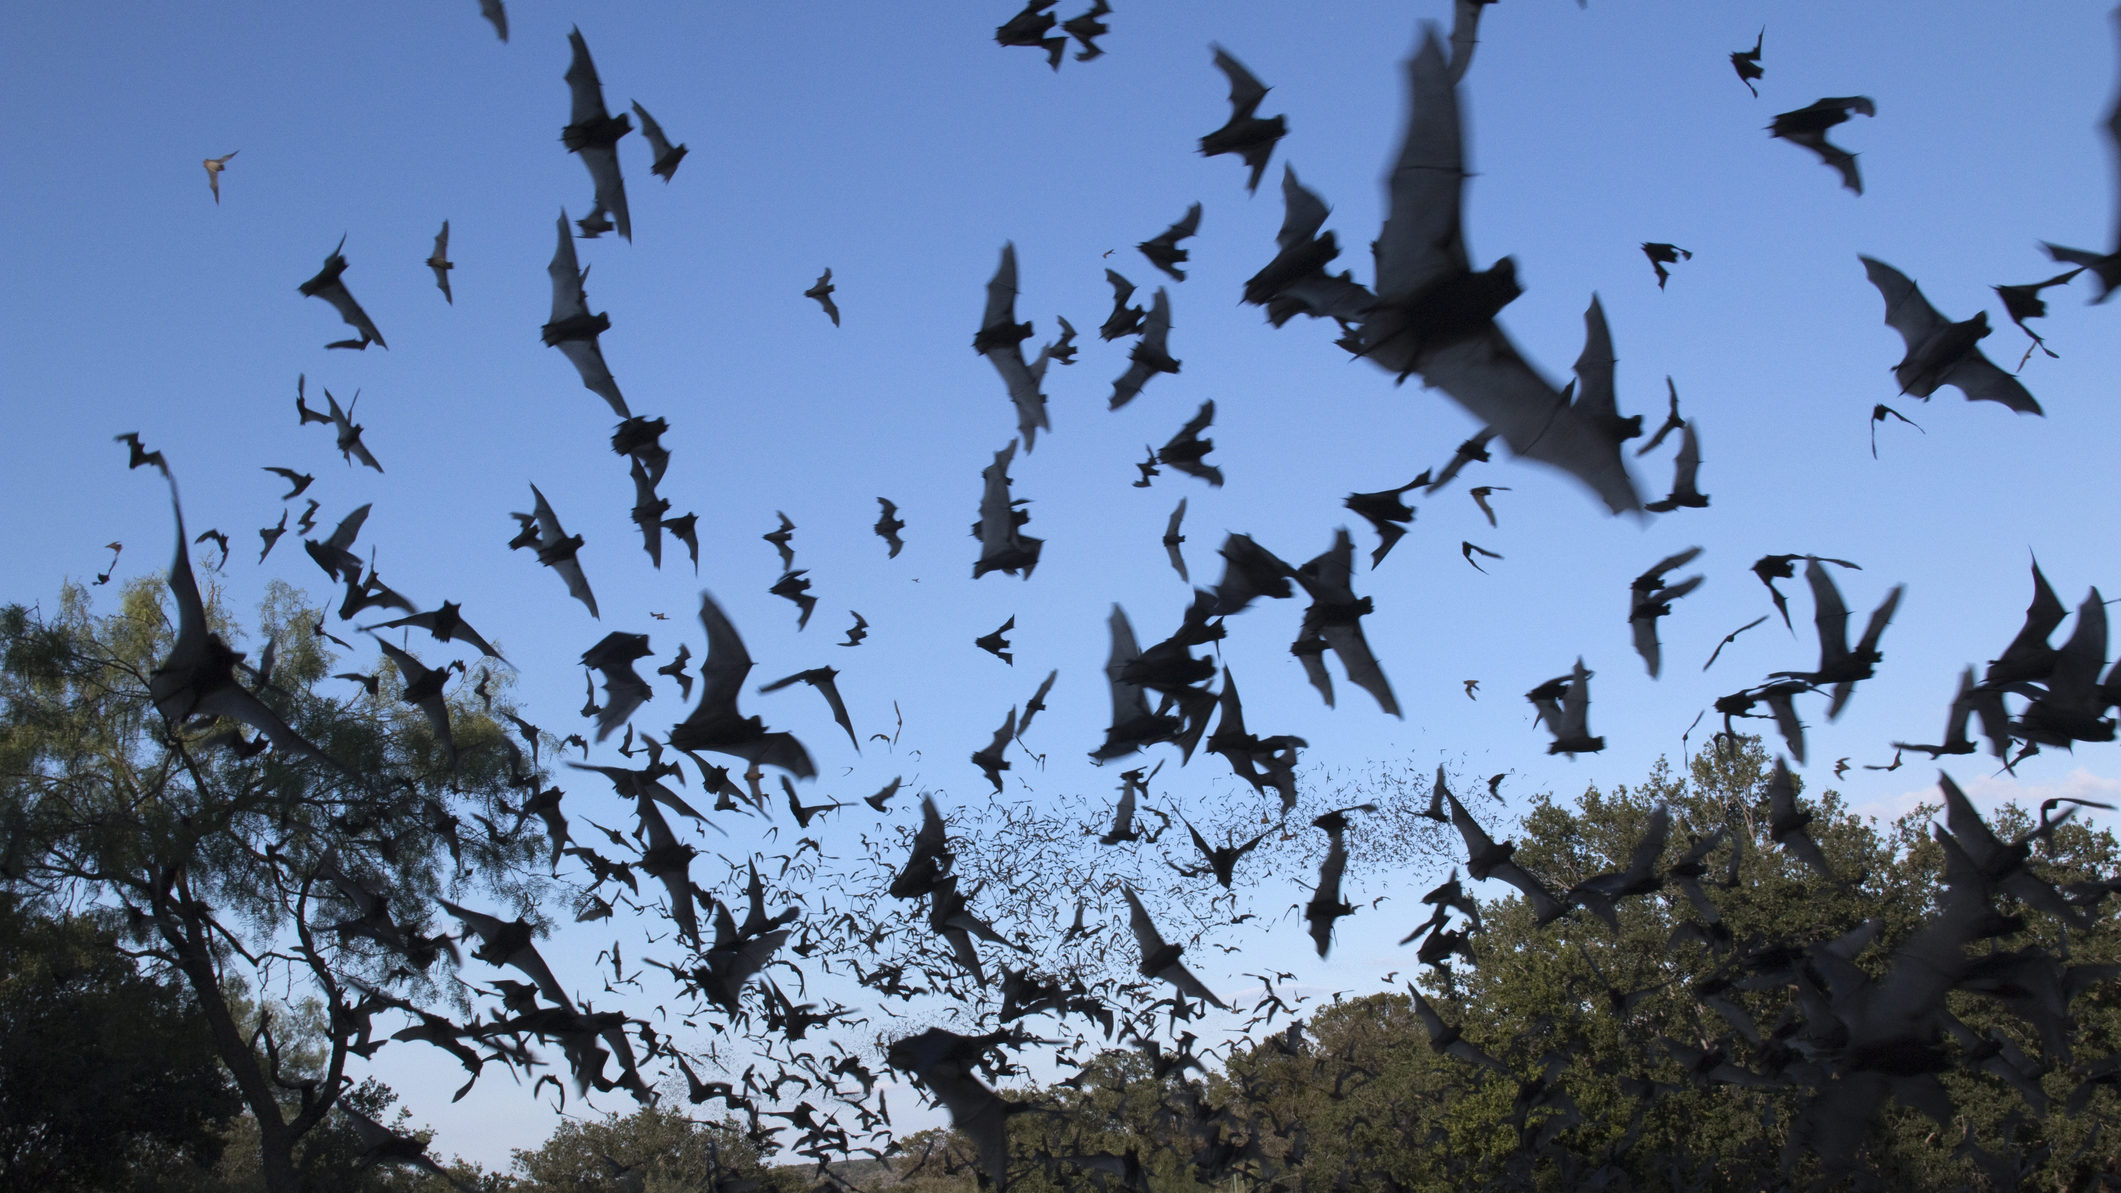 flying bats are pictured. Rabies in bats has been found recently....